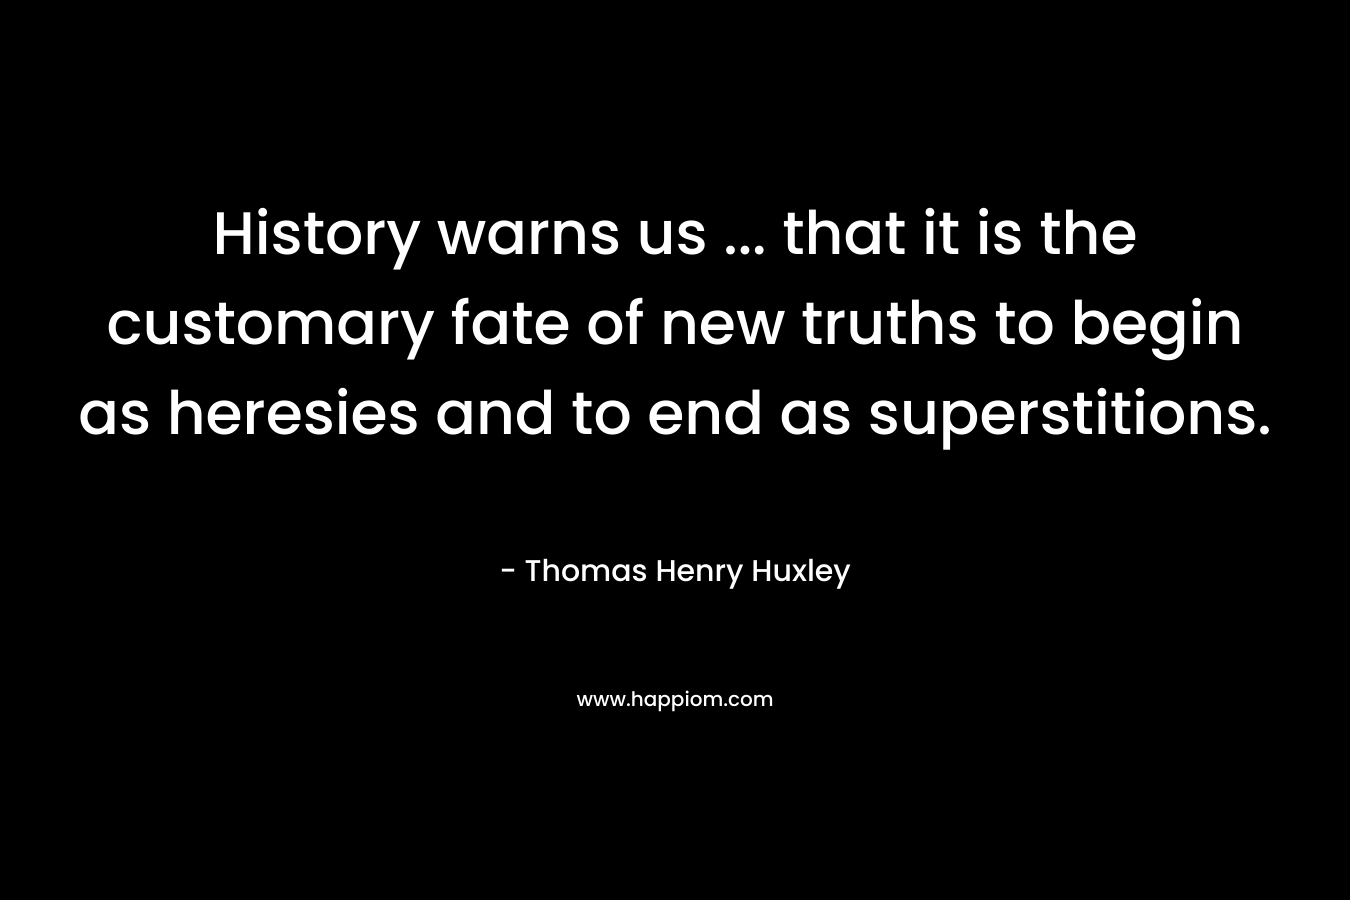 History warns us … that it is the customary fate of new truths to begin as heresies and to end as superstitions. – Thomas Henry Huxley